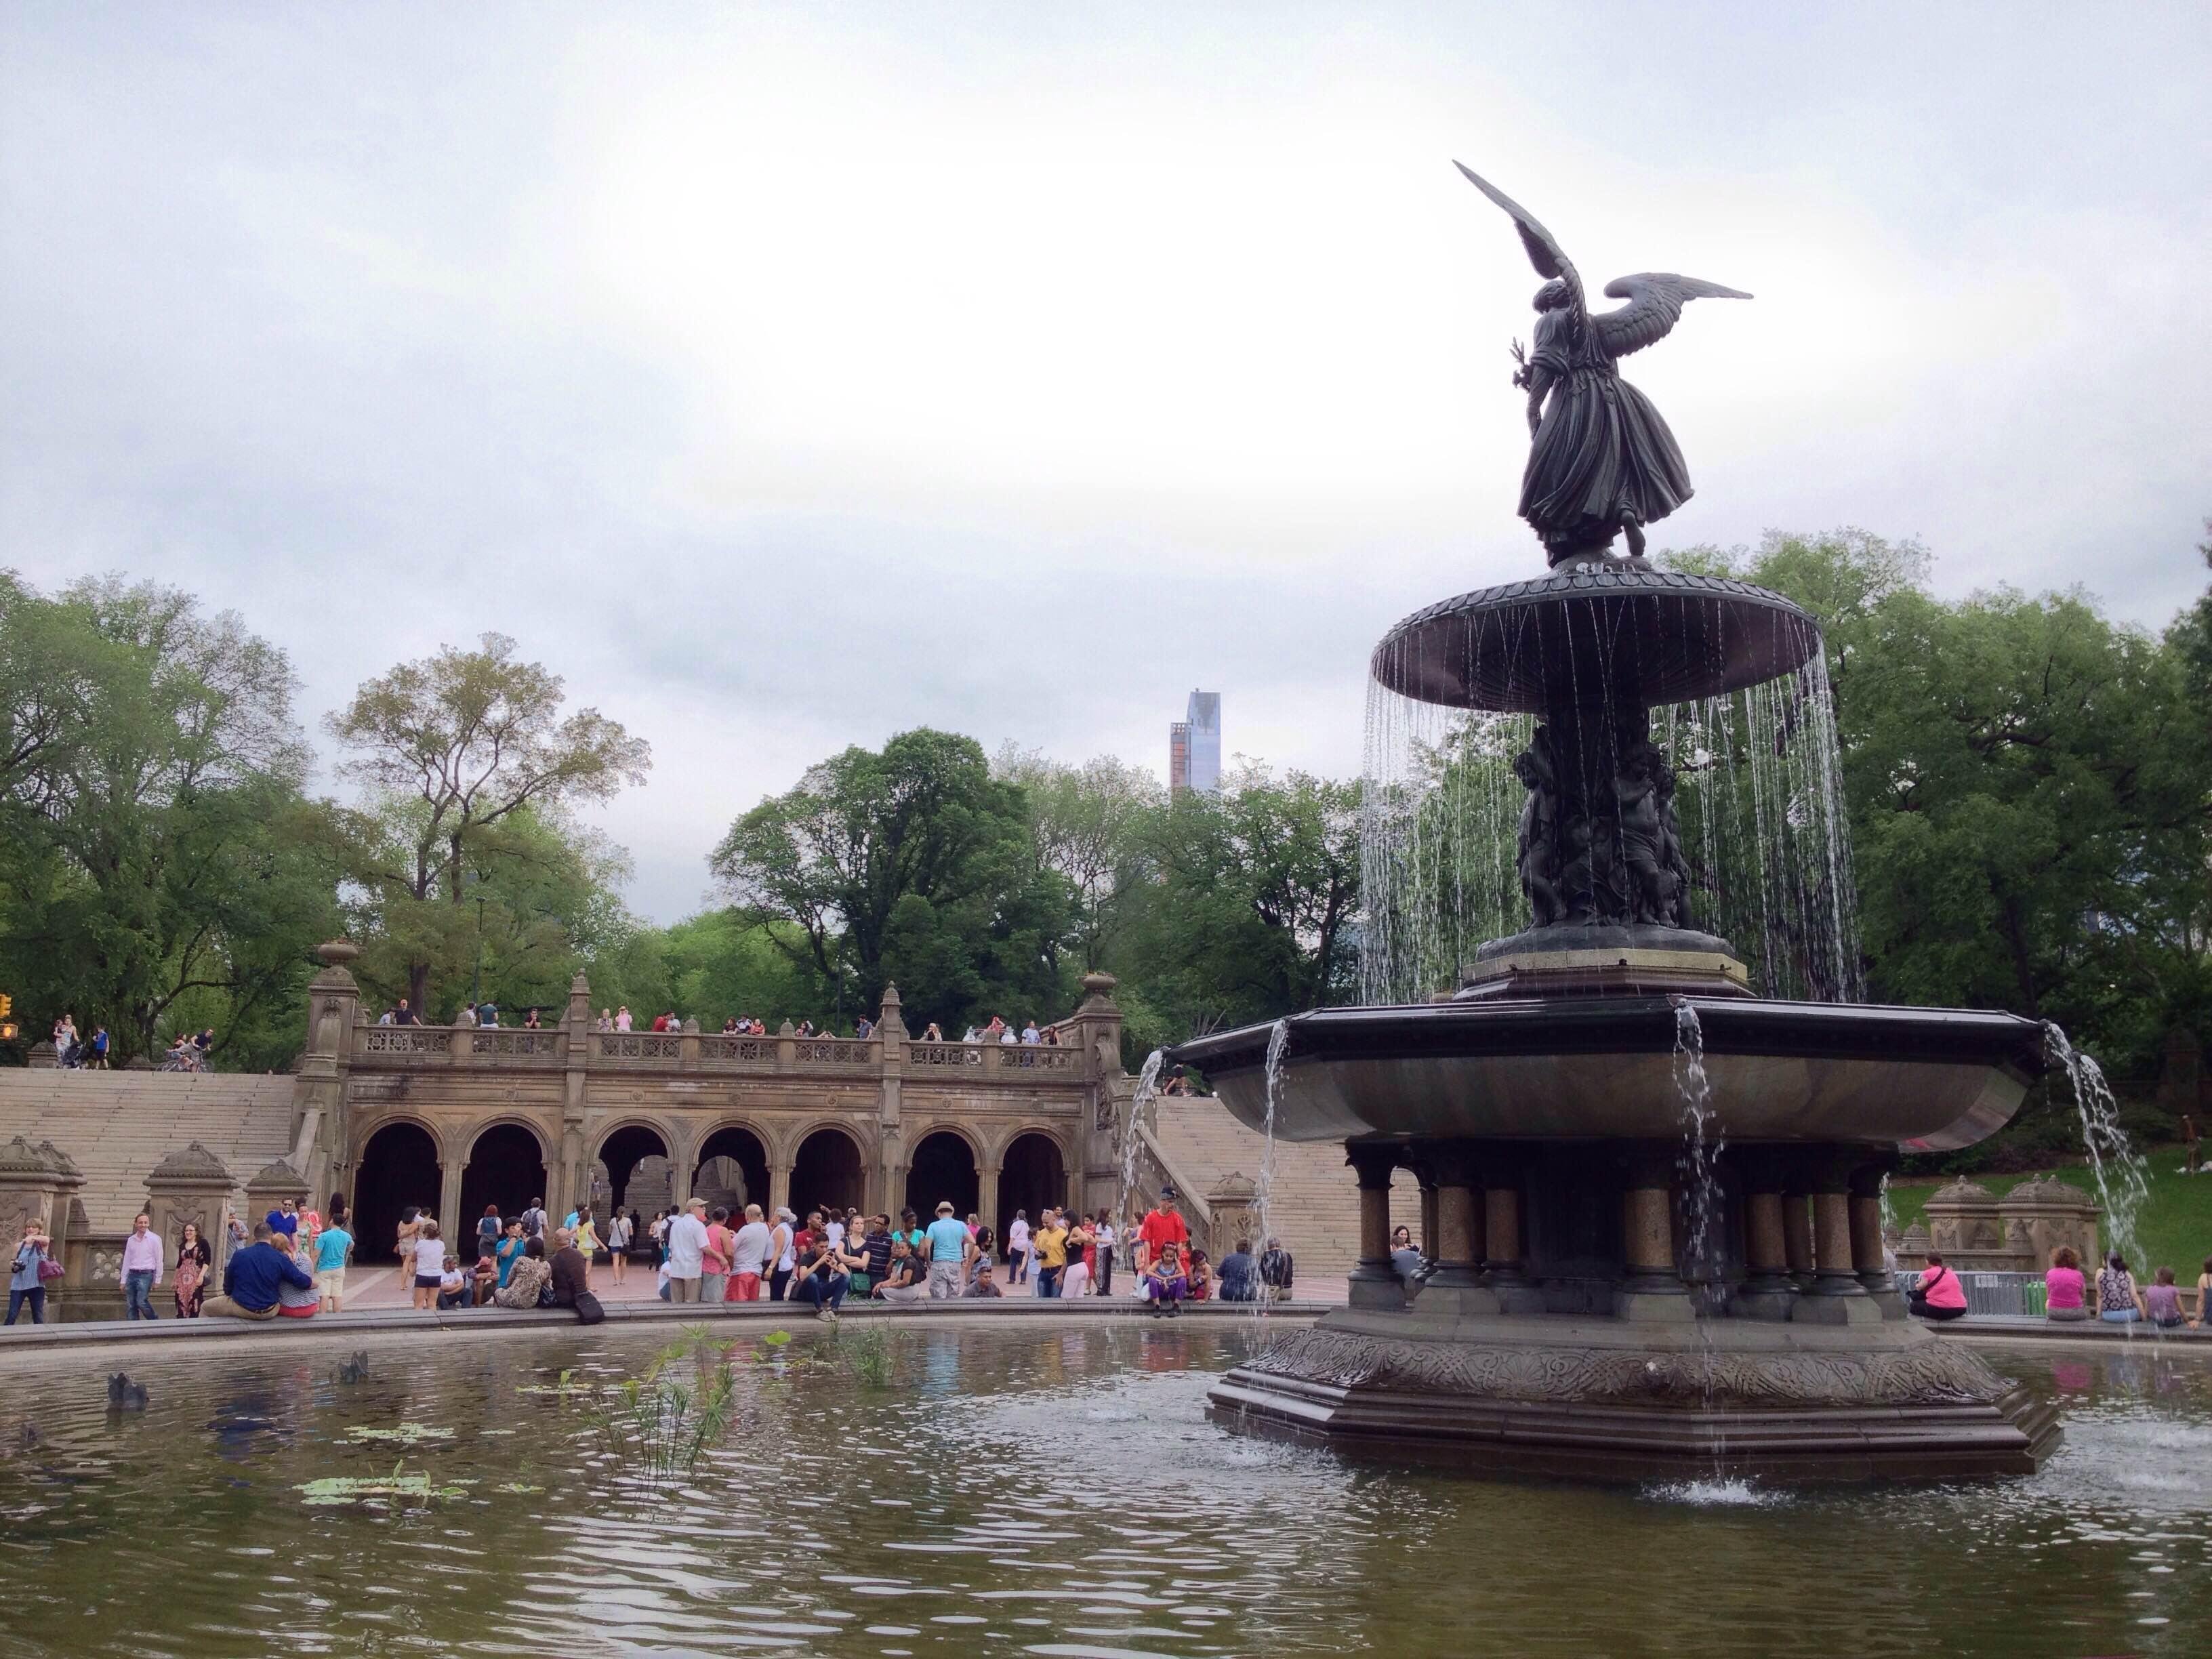 The story behind Central Park's iconic Bethesda NYC fountain